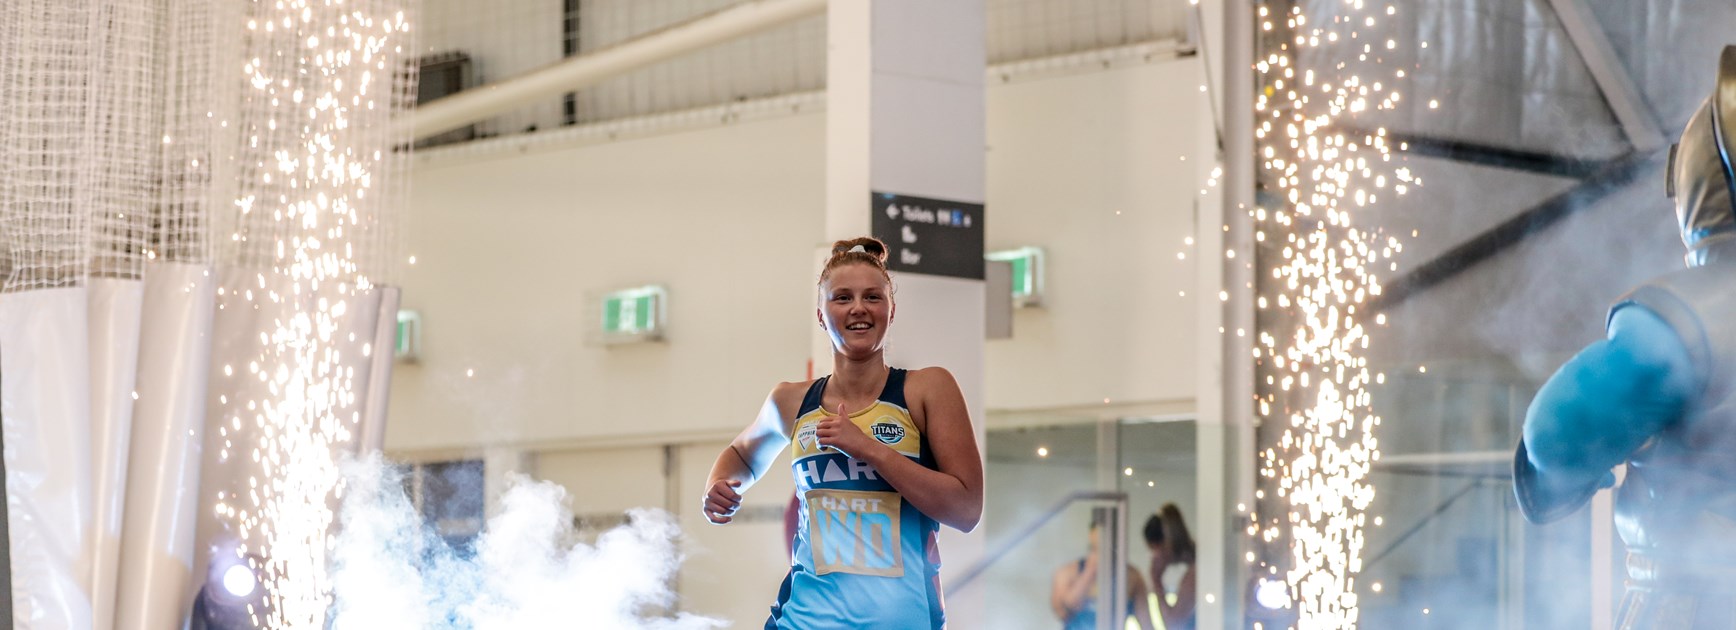 Home crowd a highlight in a tough weekend for Titans Netball